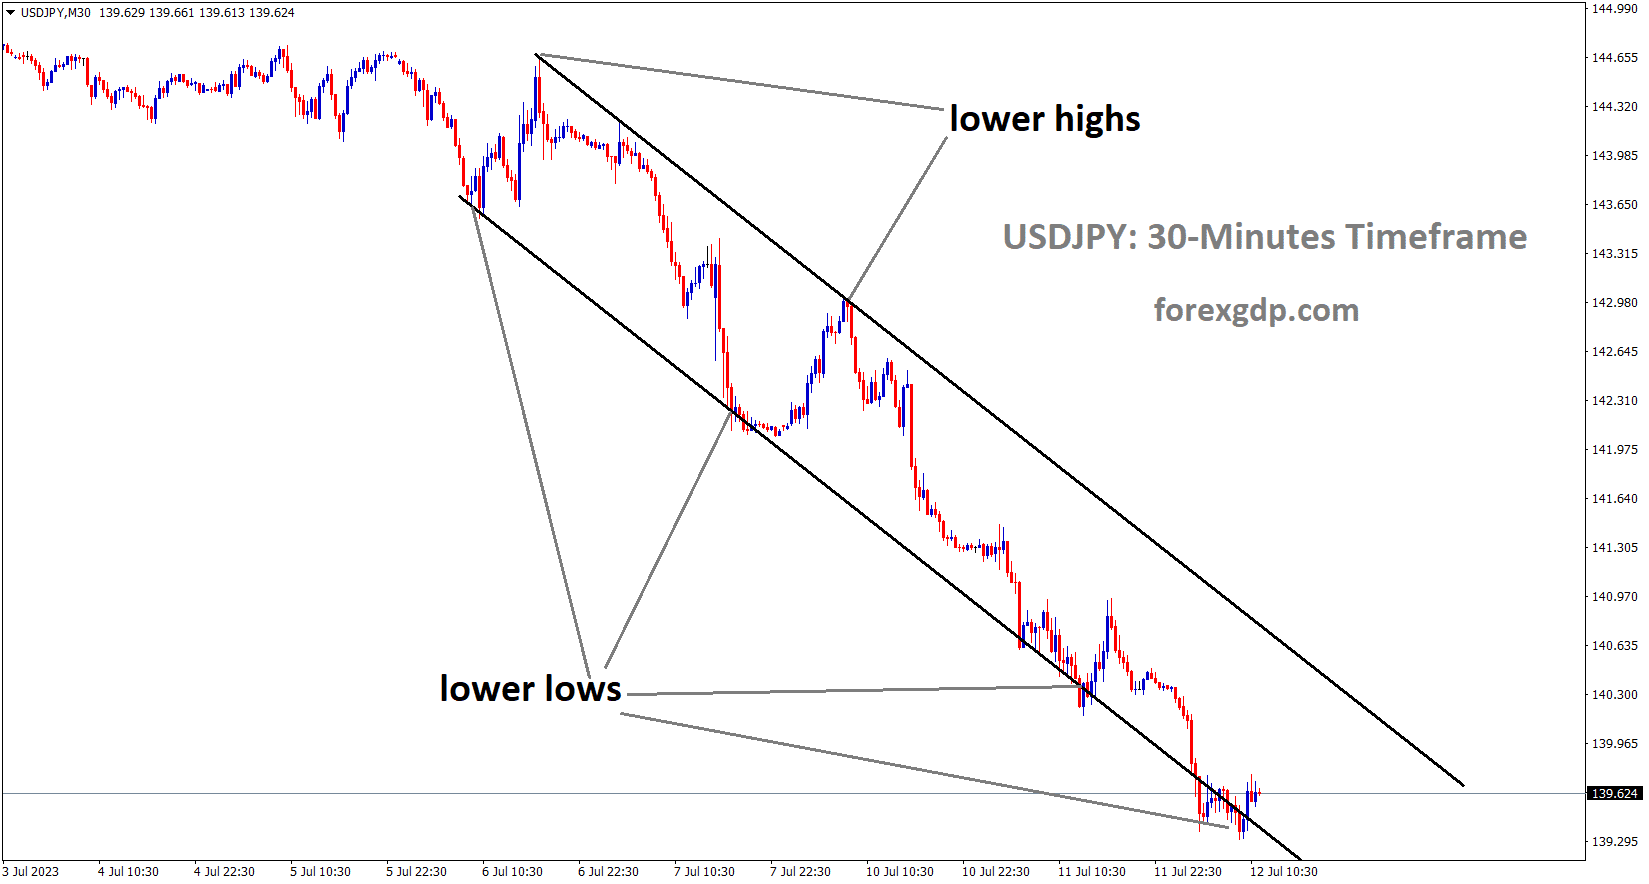 USDJPY is moving in the Descending channel and the market has reached the lower low area of the channel